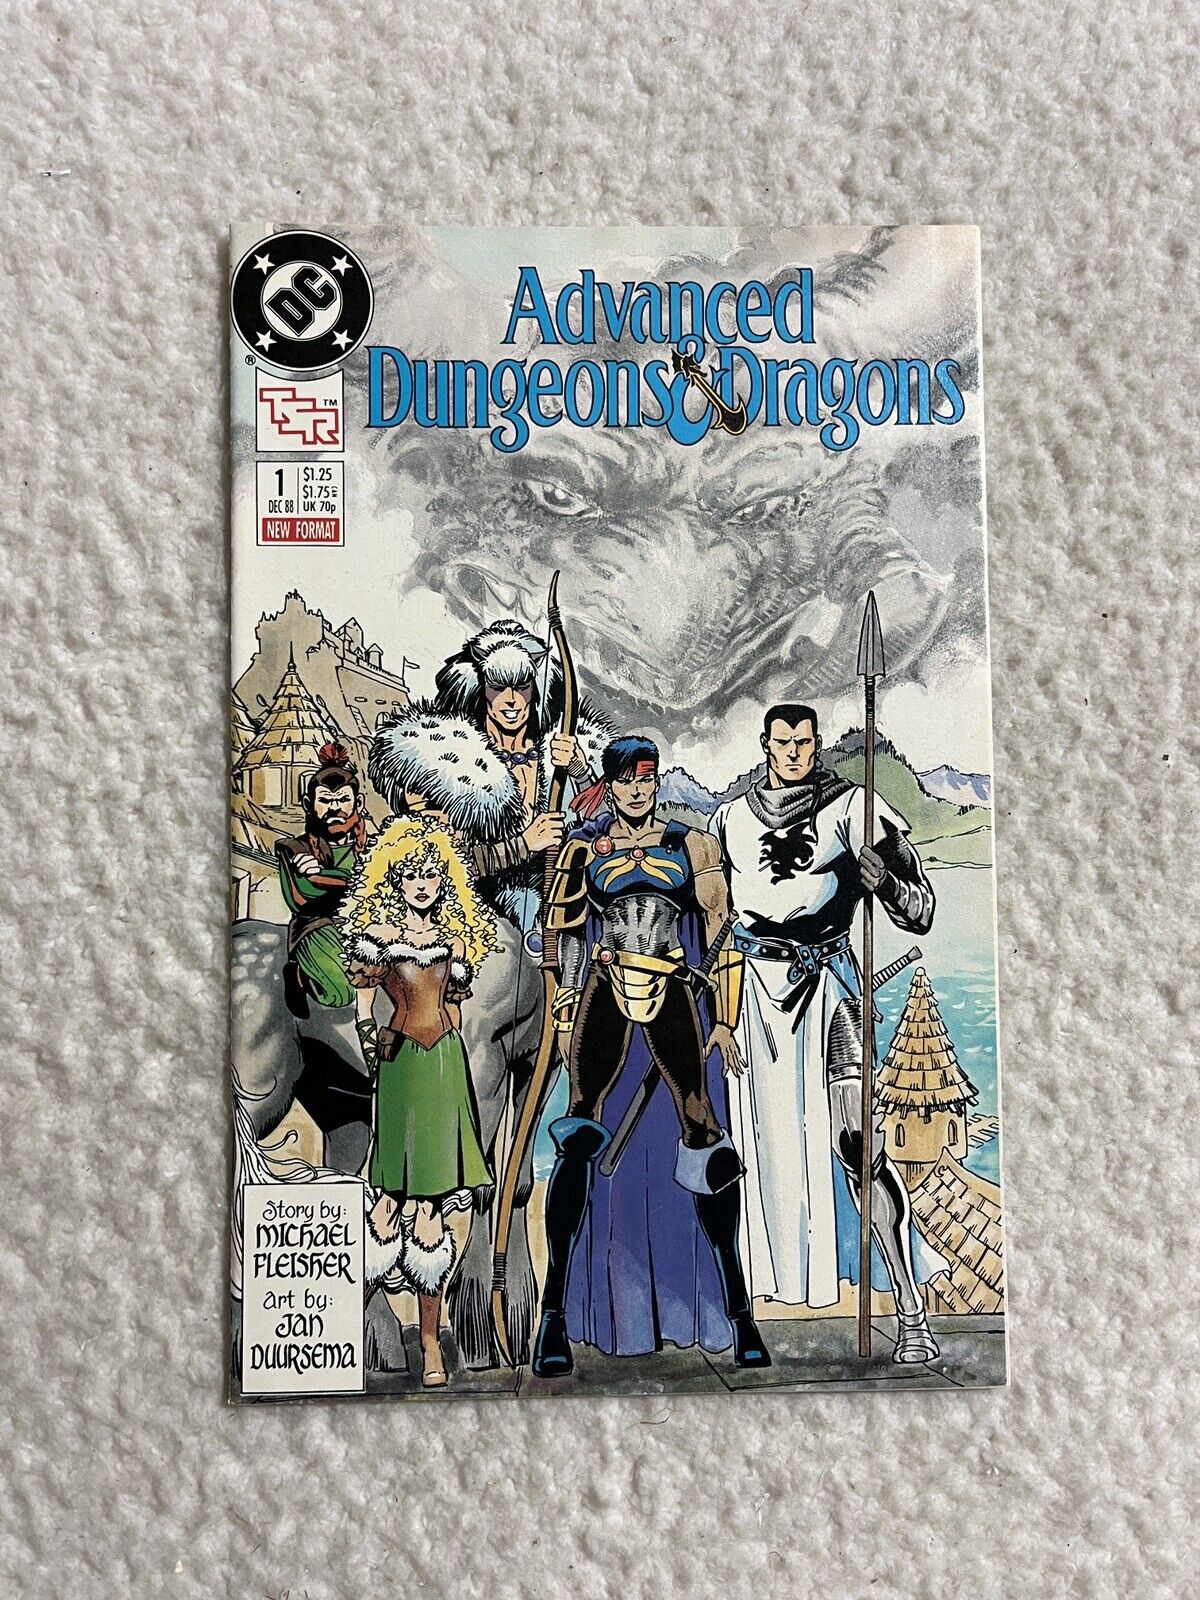 Advanced Dungeon & Dragons #1 DC Comics 1988 First Appearance Higher Grade